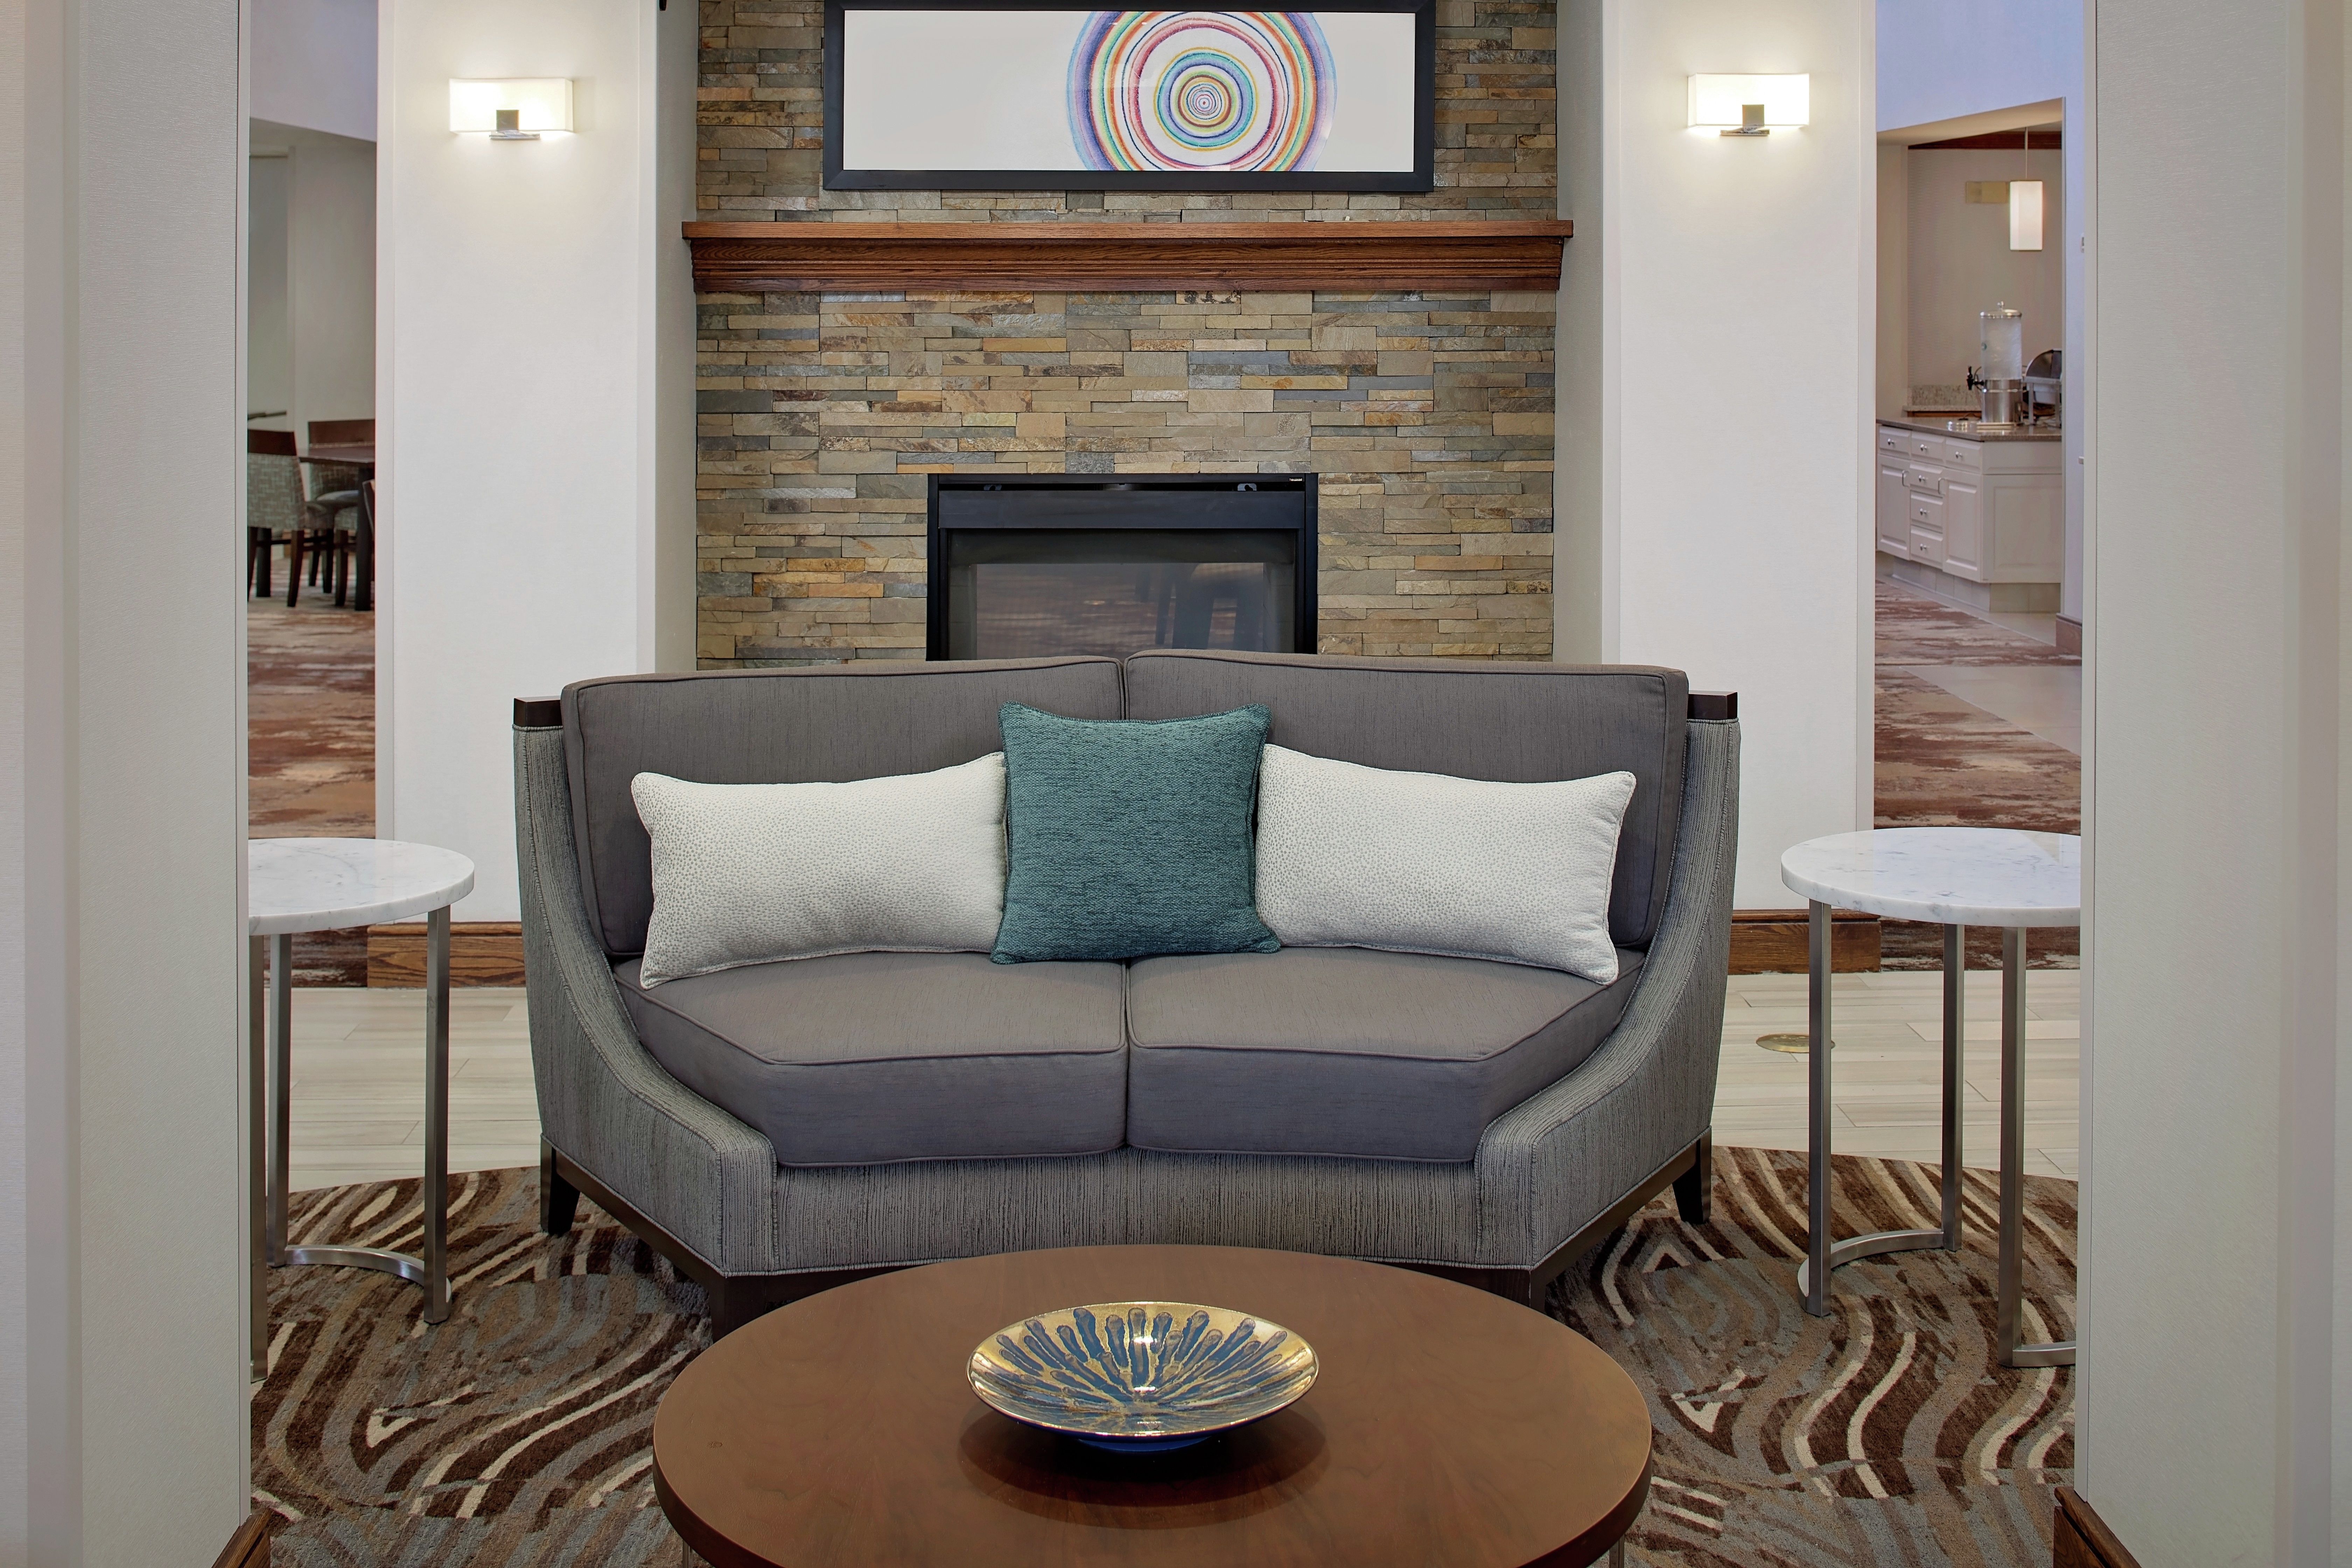 Couch by Fireplace in Lobby